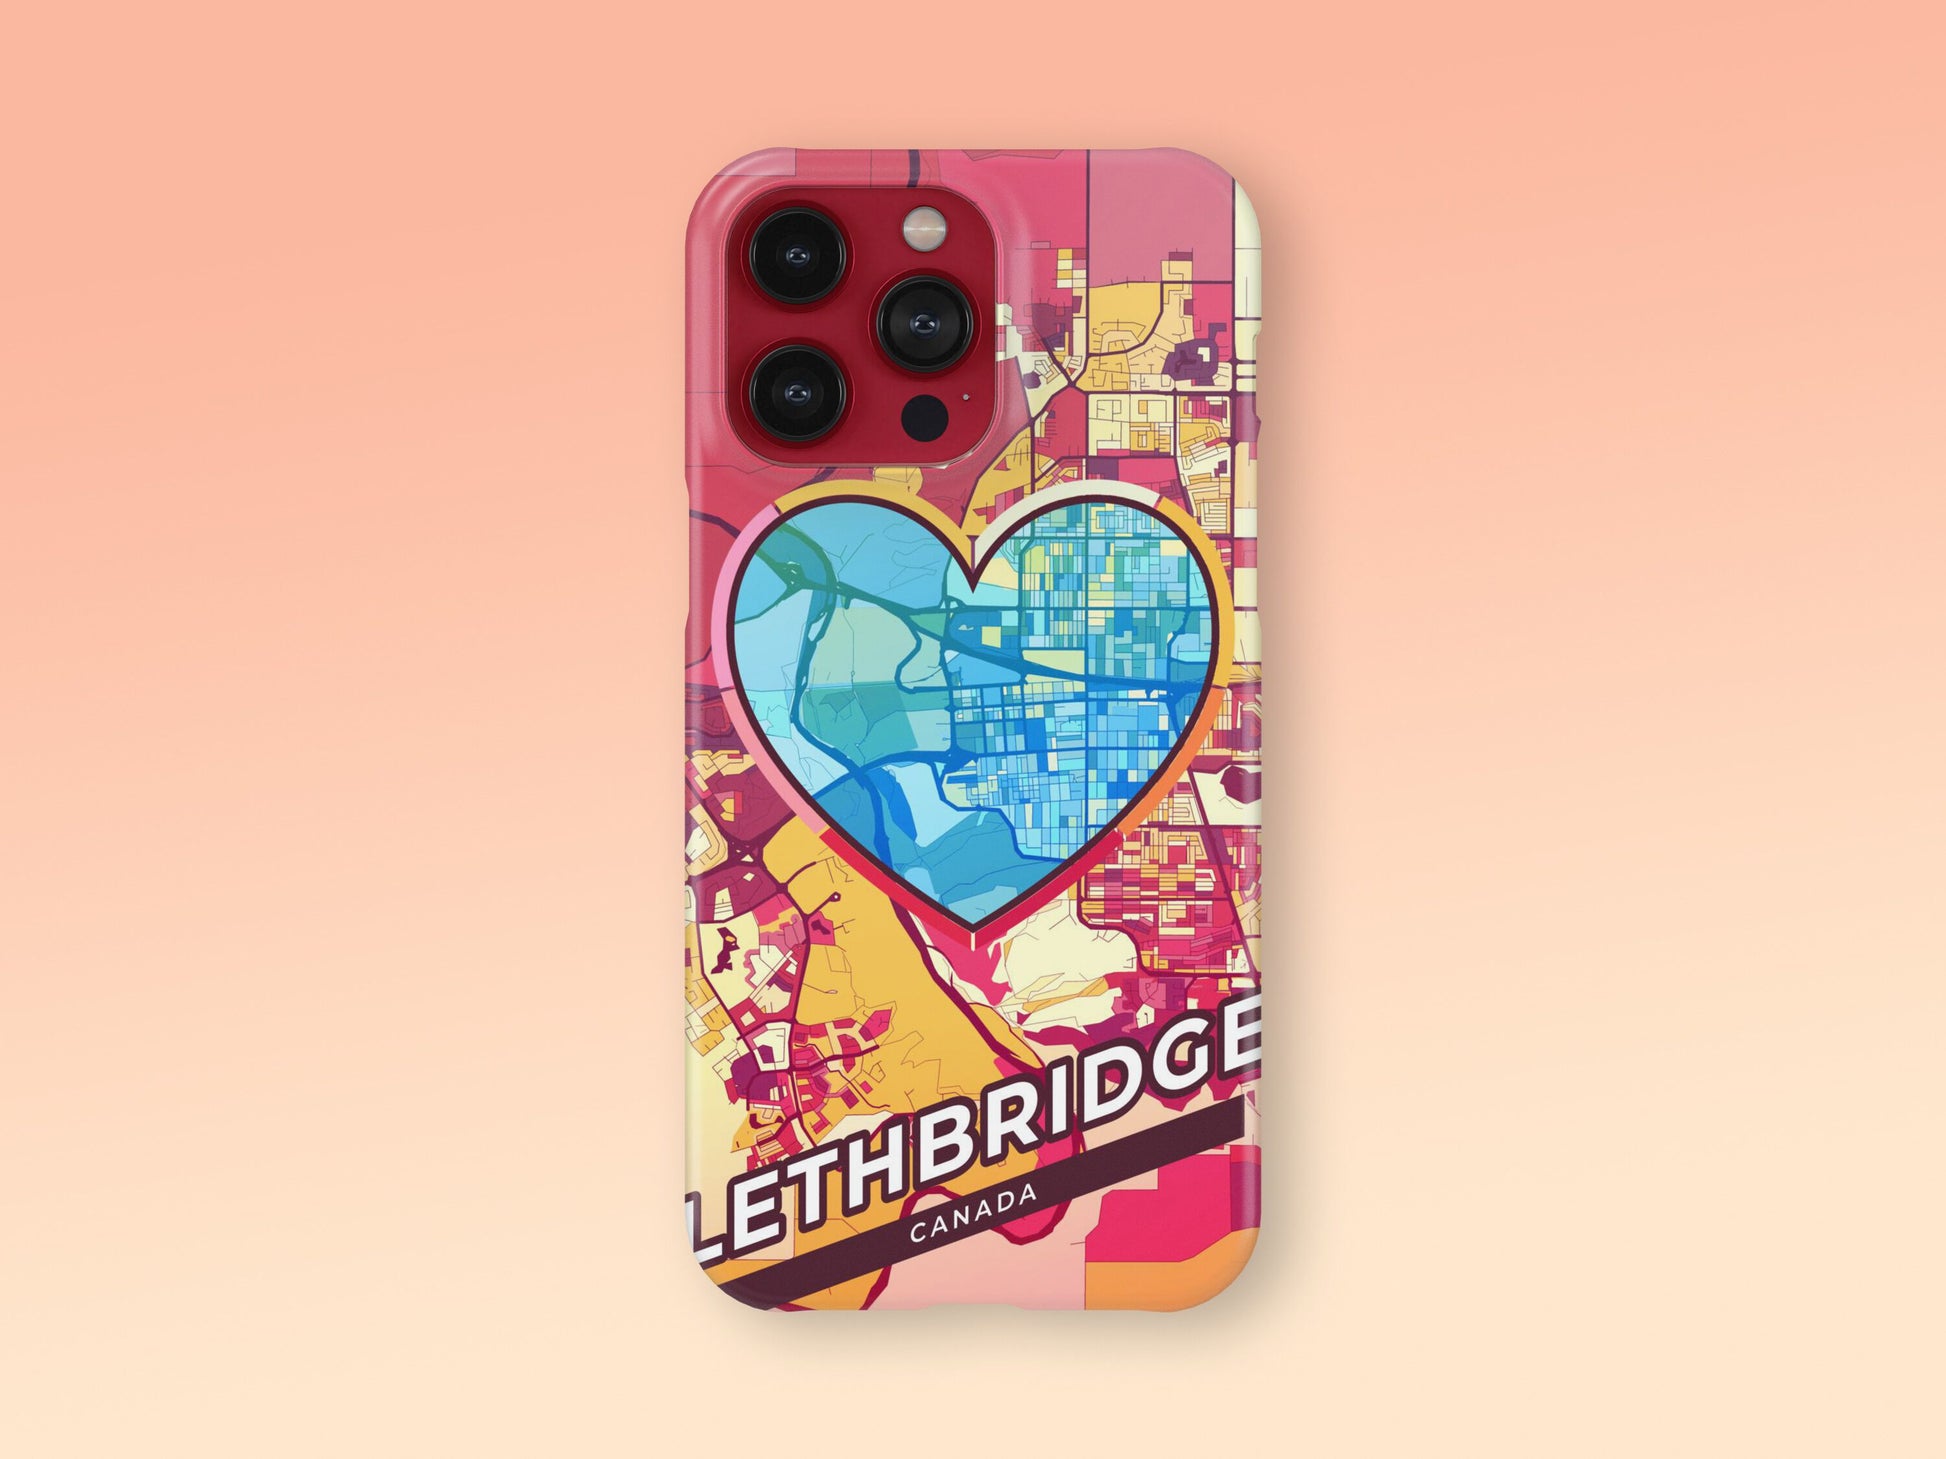 Lethbridge Canada slim phone case with colorful icon. Birthday, wedding or housewarming gift. Couple match cases. 2